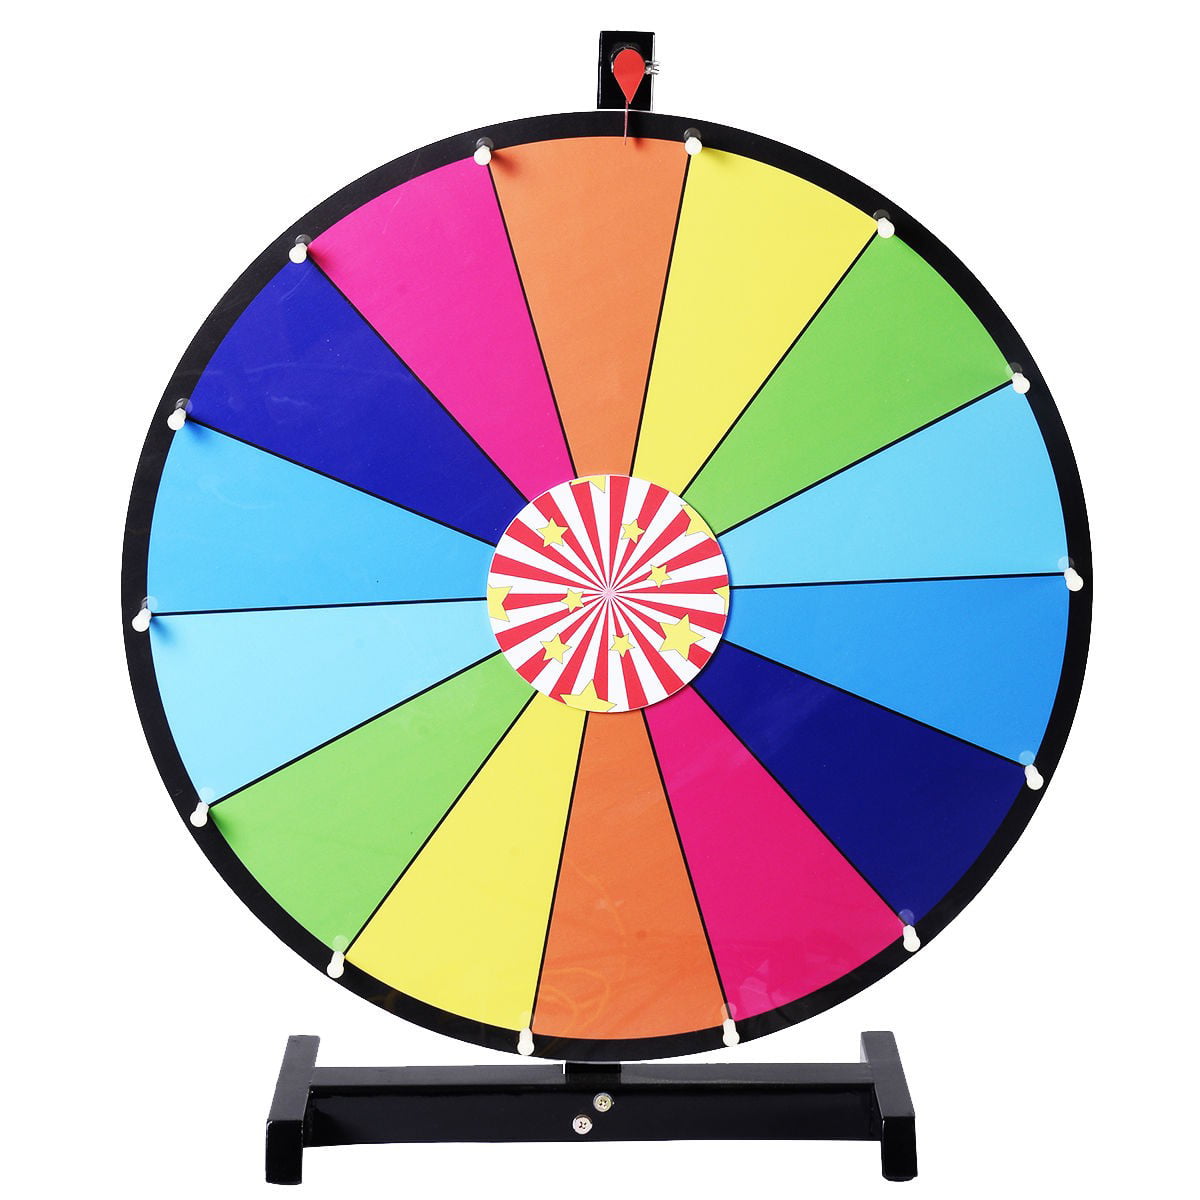 24" Color Prize Wheel of Fortune Dry Erase Trade Show Spinning Game Adult Toy US 